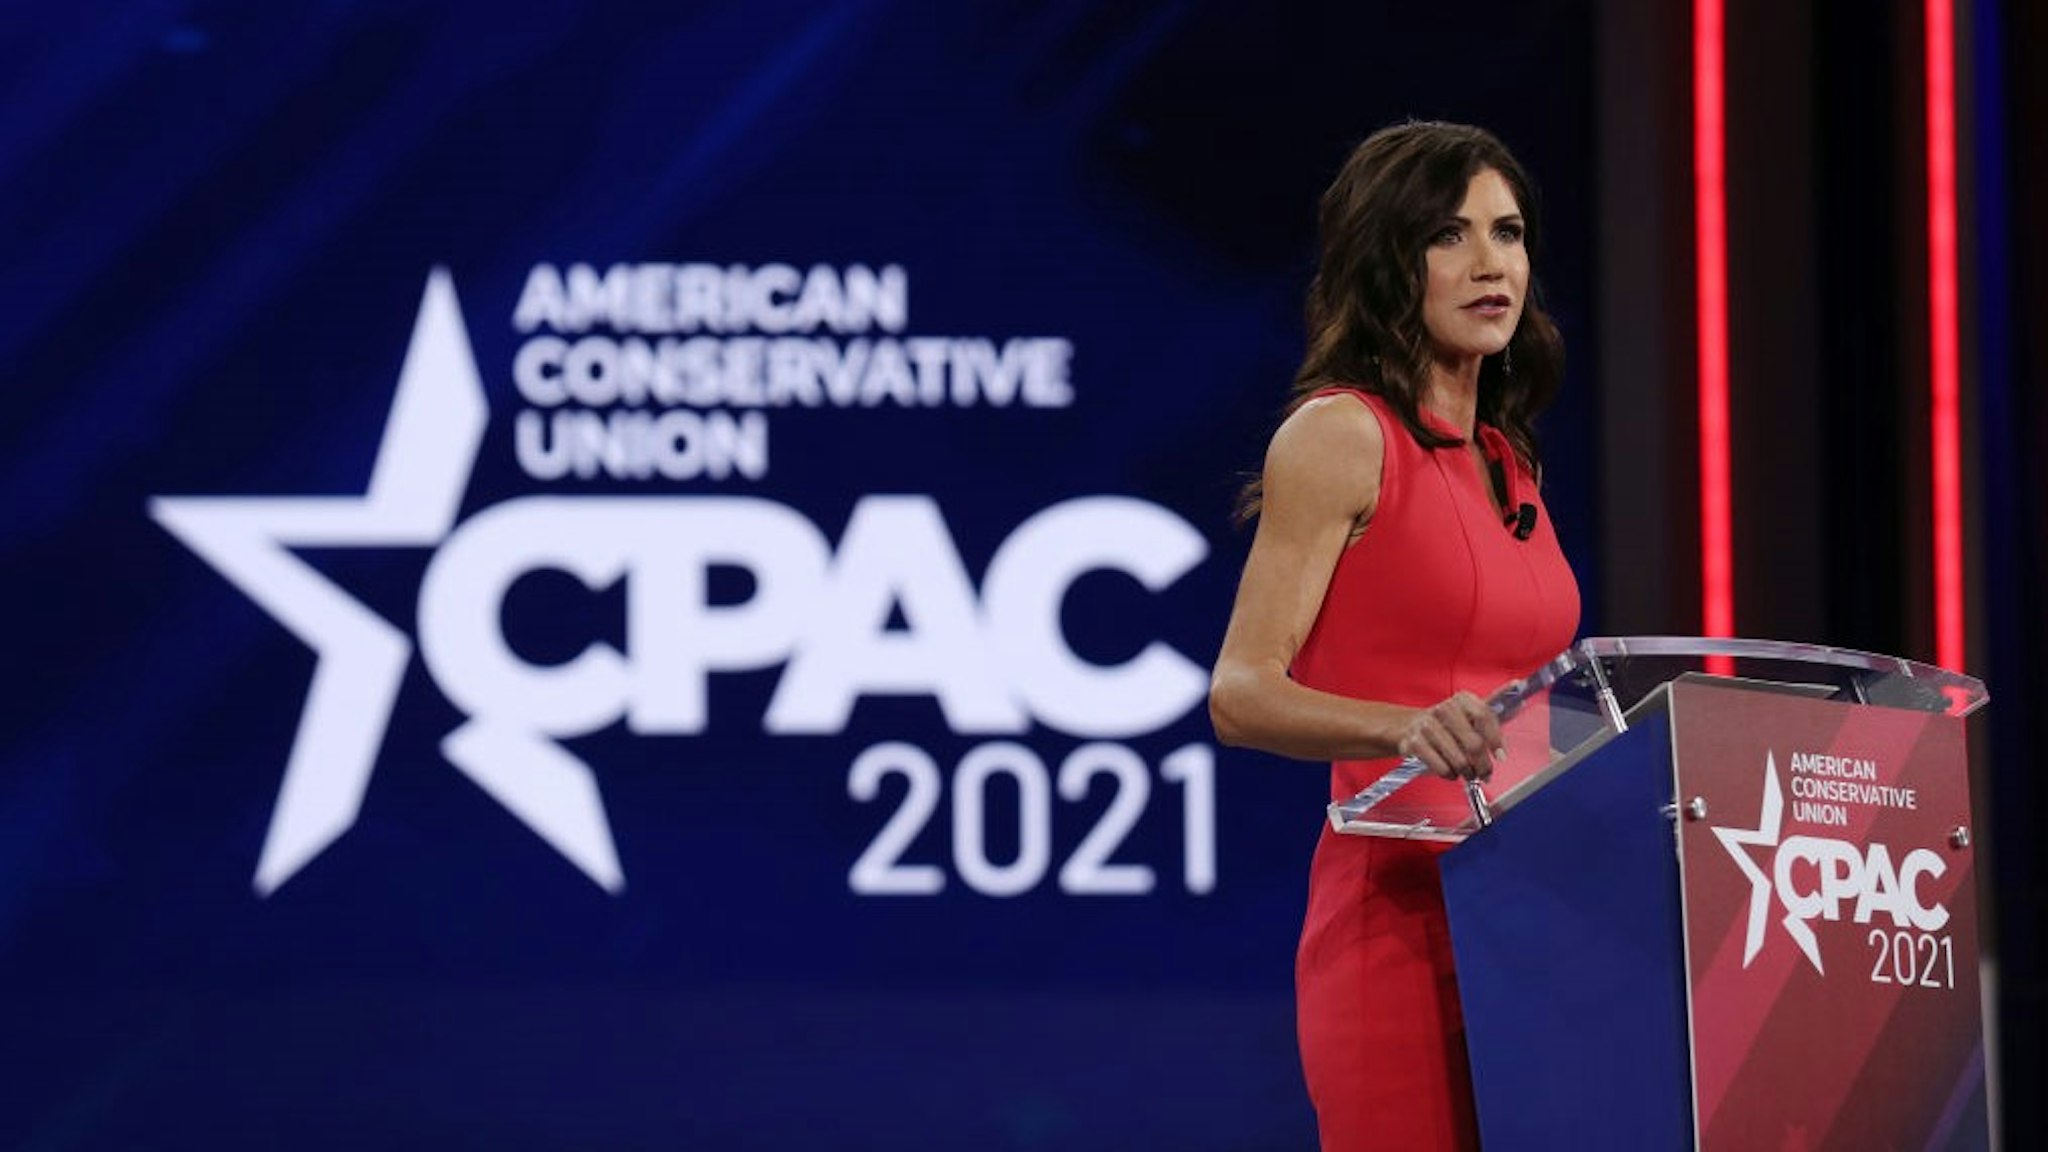 ORLANDO, FLORIDA - FEBRUARY 27: South Dakota Gov. Kristi Noem addresses the Conservative Political Action Conference held in the Hyatt Regency on February 27, 2021 in Orlando, Florida. Begun in 1974, CPAC brings together conservative organizations, activists, and world leaders to discuss issues important to them. (Photo by